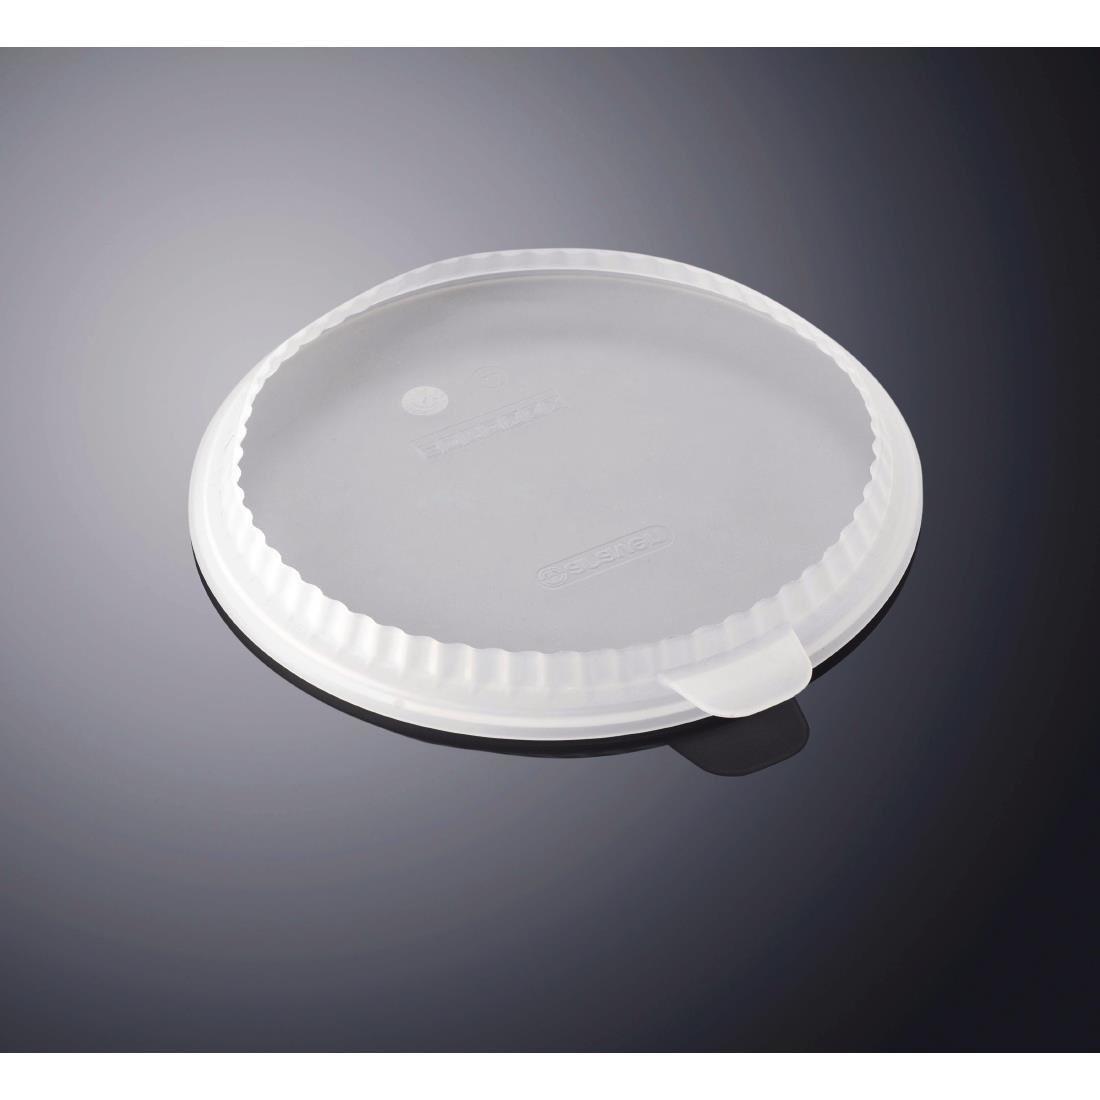 FP933 Araven Round Silicone Lid Clear 325mm JD Catering Equipment Solutions Ltd